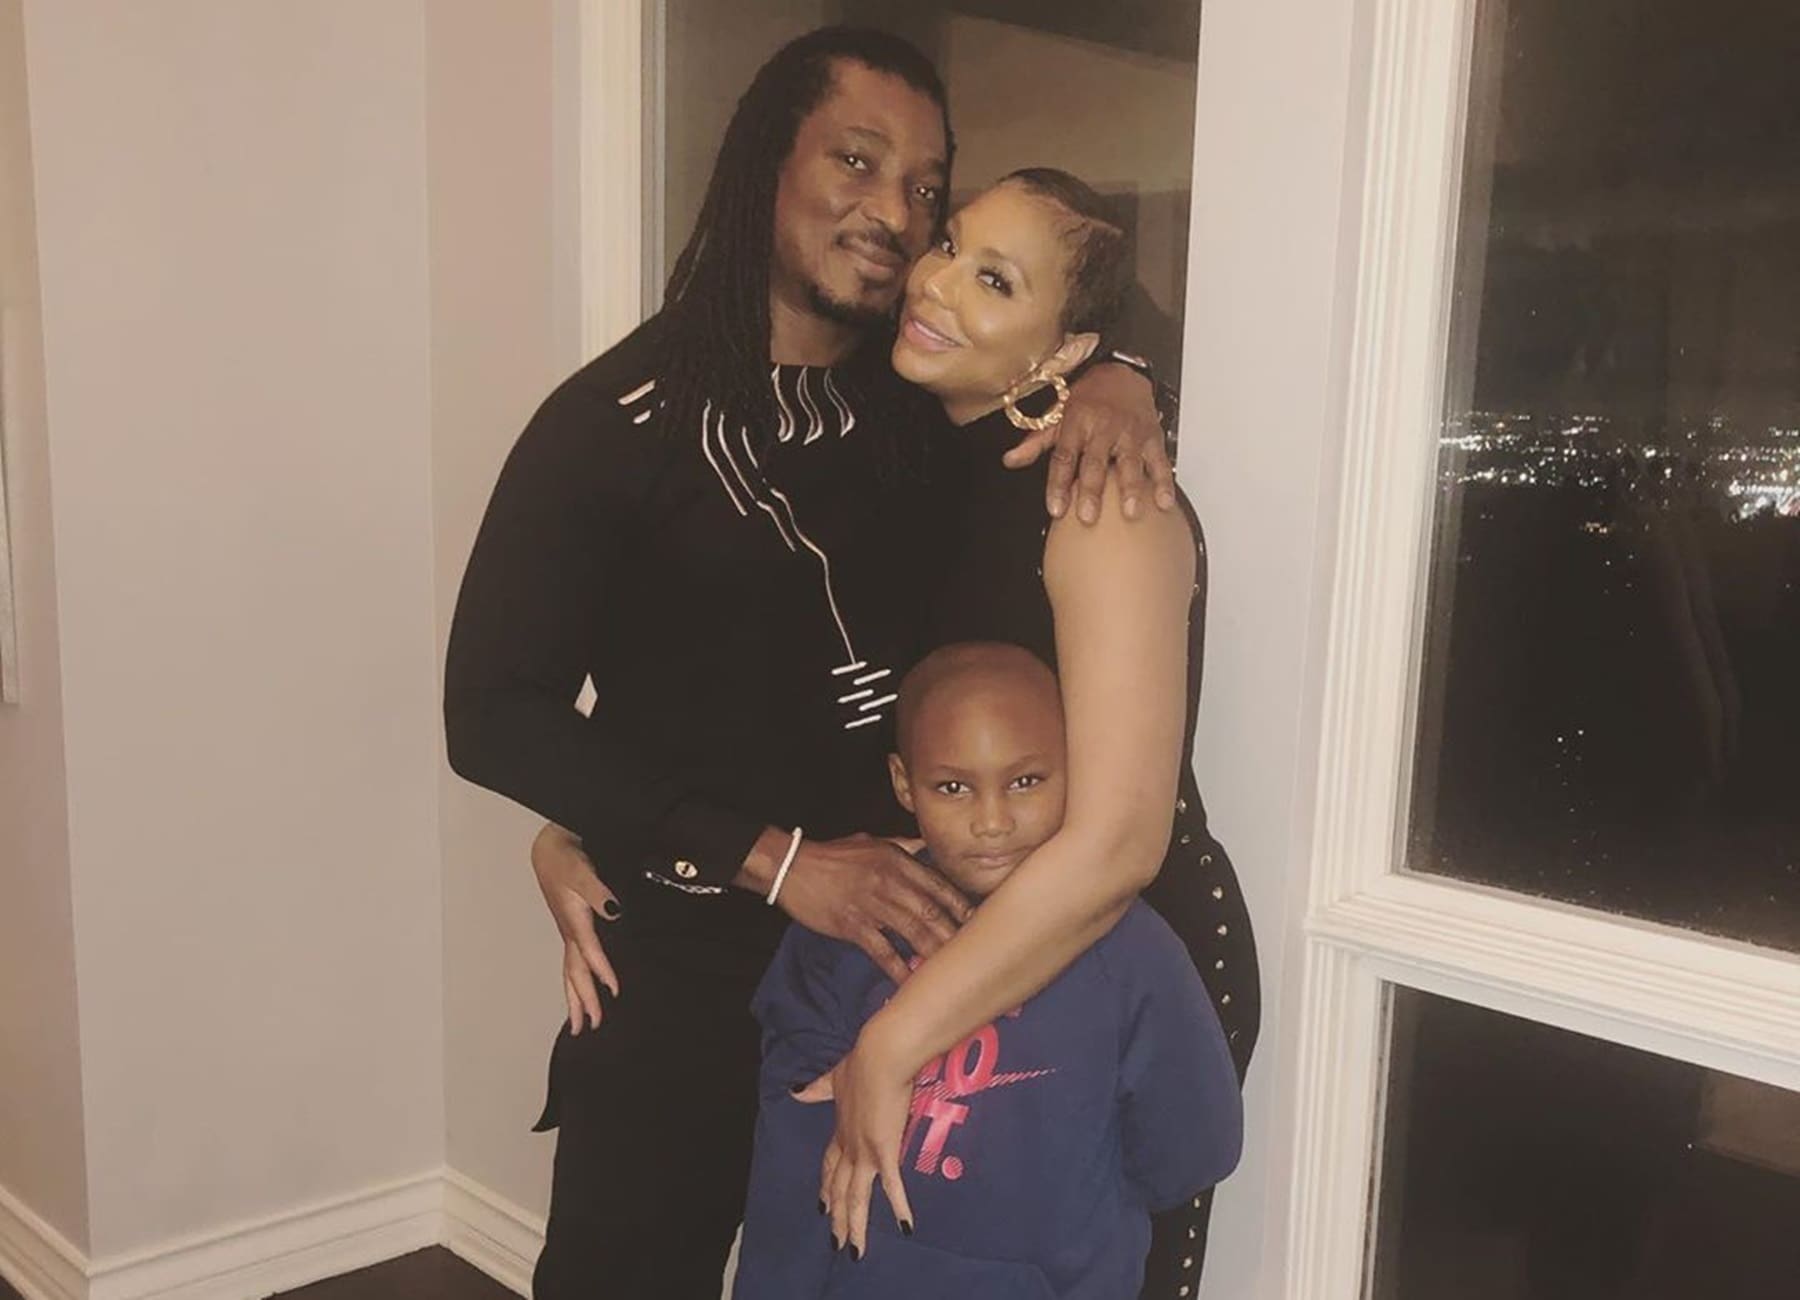 Tamar Braxton's BF, David Adefeso, Is Building The Most Amazing relationship With Her Son - See The Video